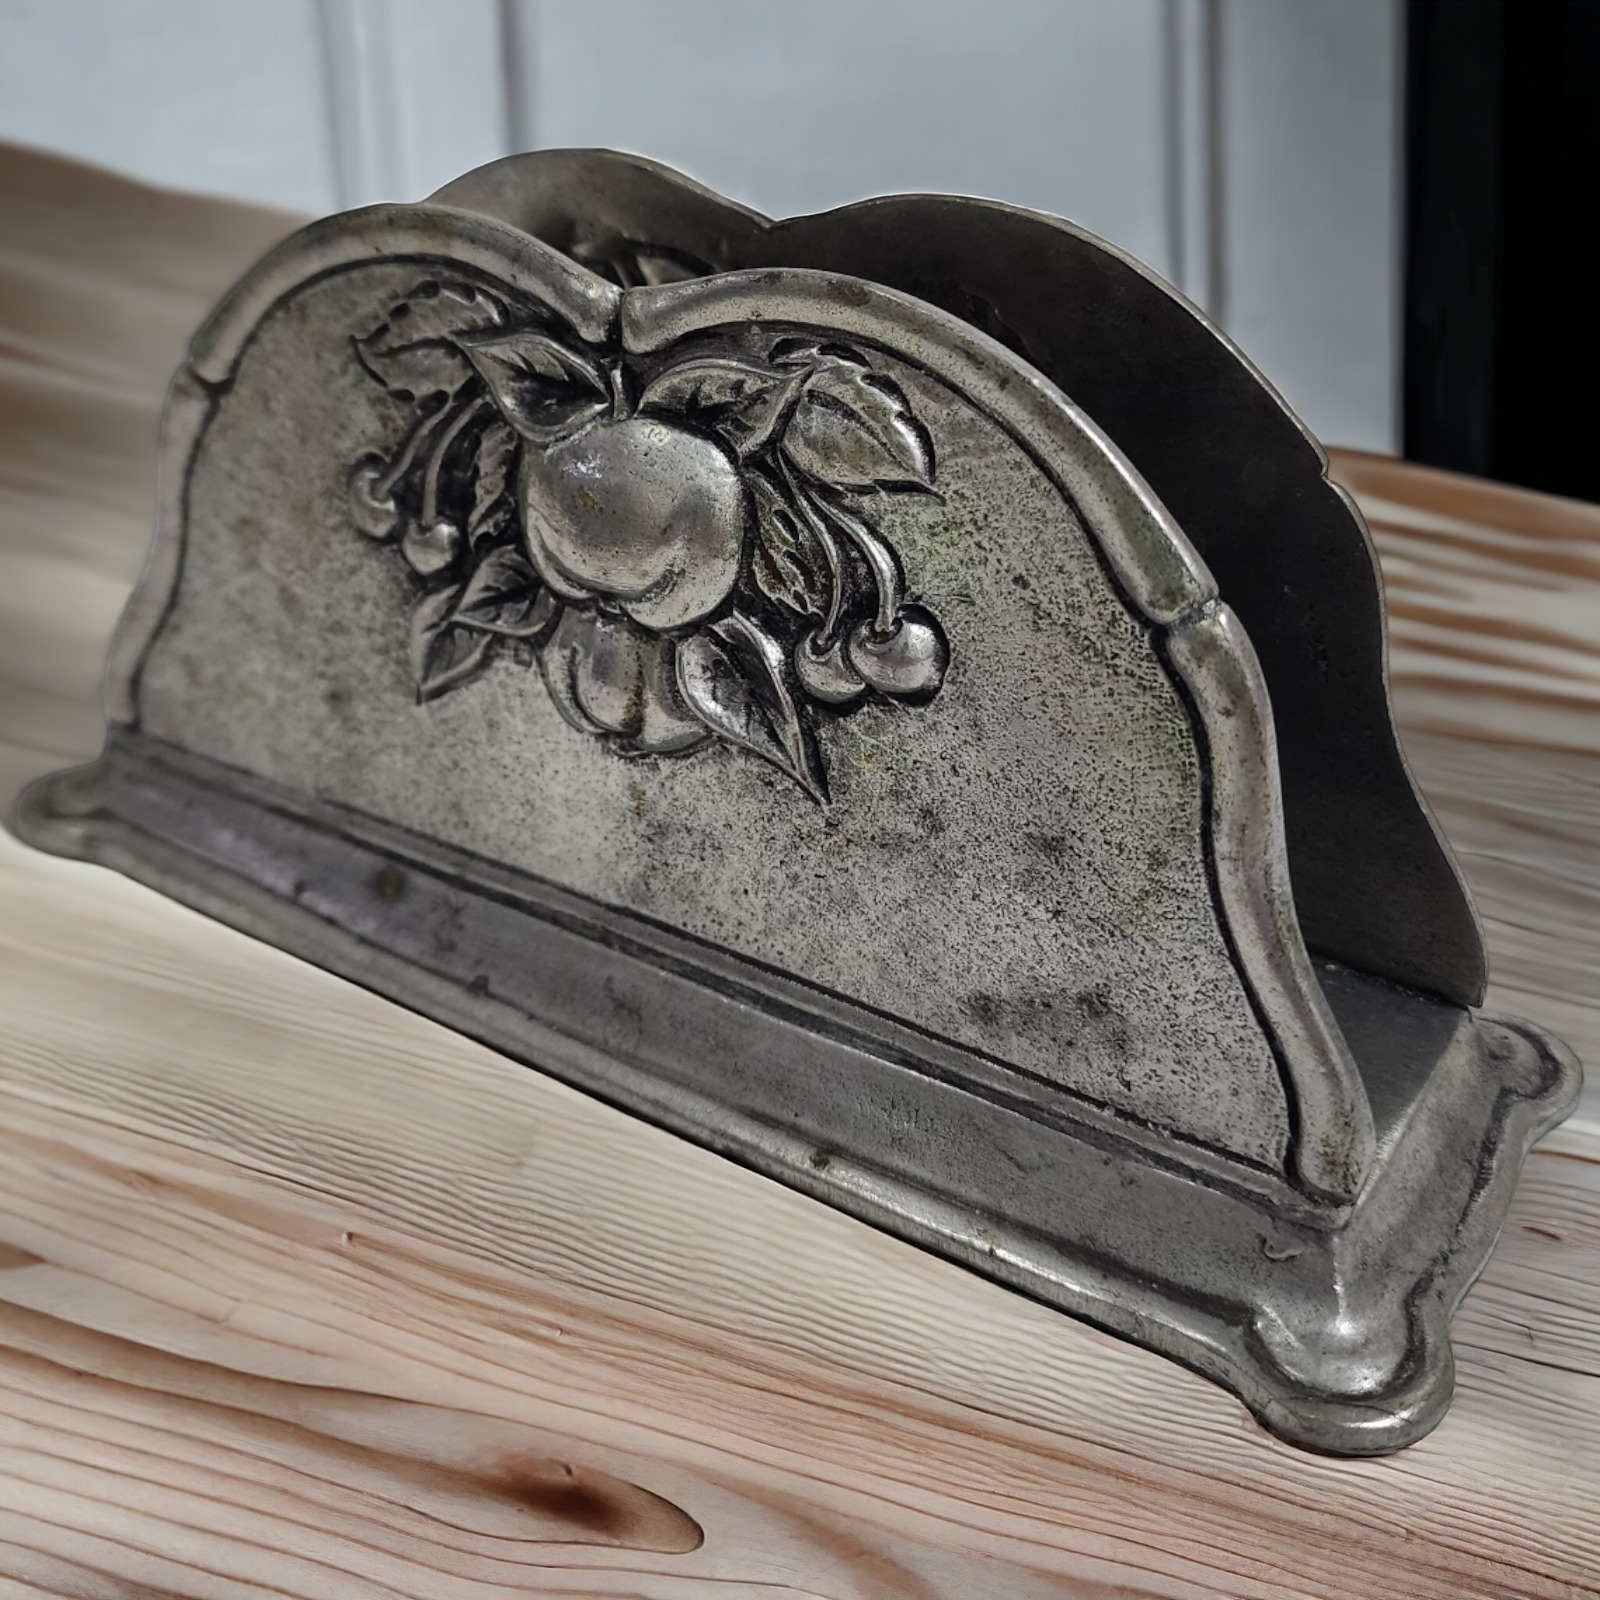 French Vintage 95% Zinn Etain Pewter letter rack with relief Pattern Maker Marks